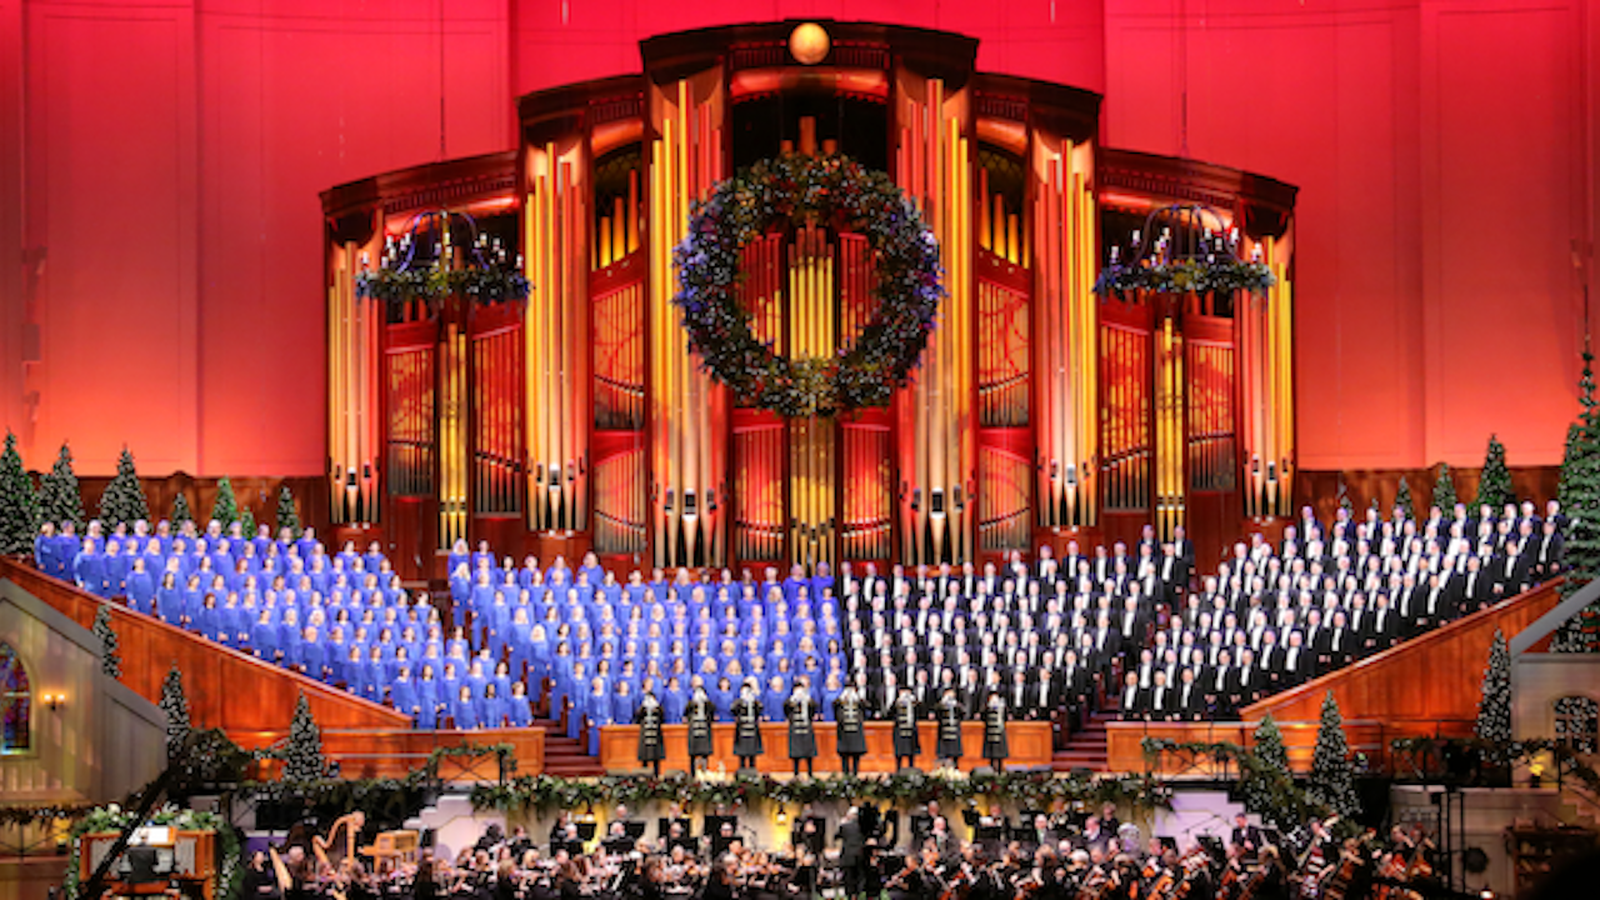 See the Tabernacle Choir's Christmas program live without a concert